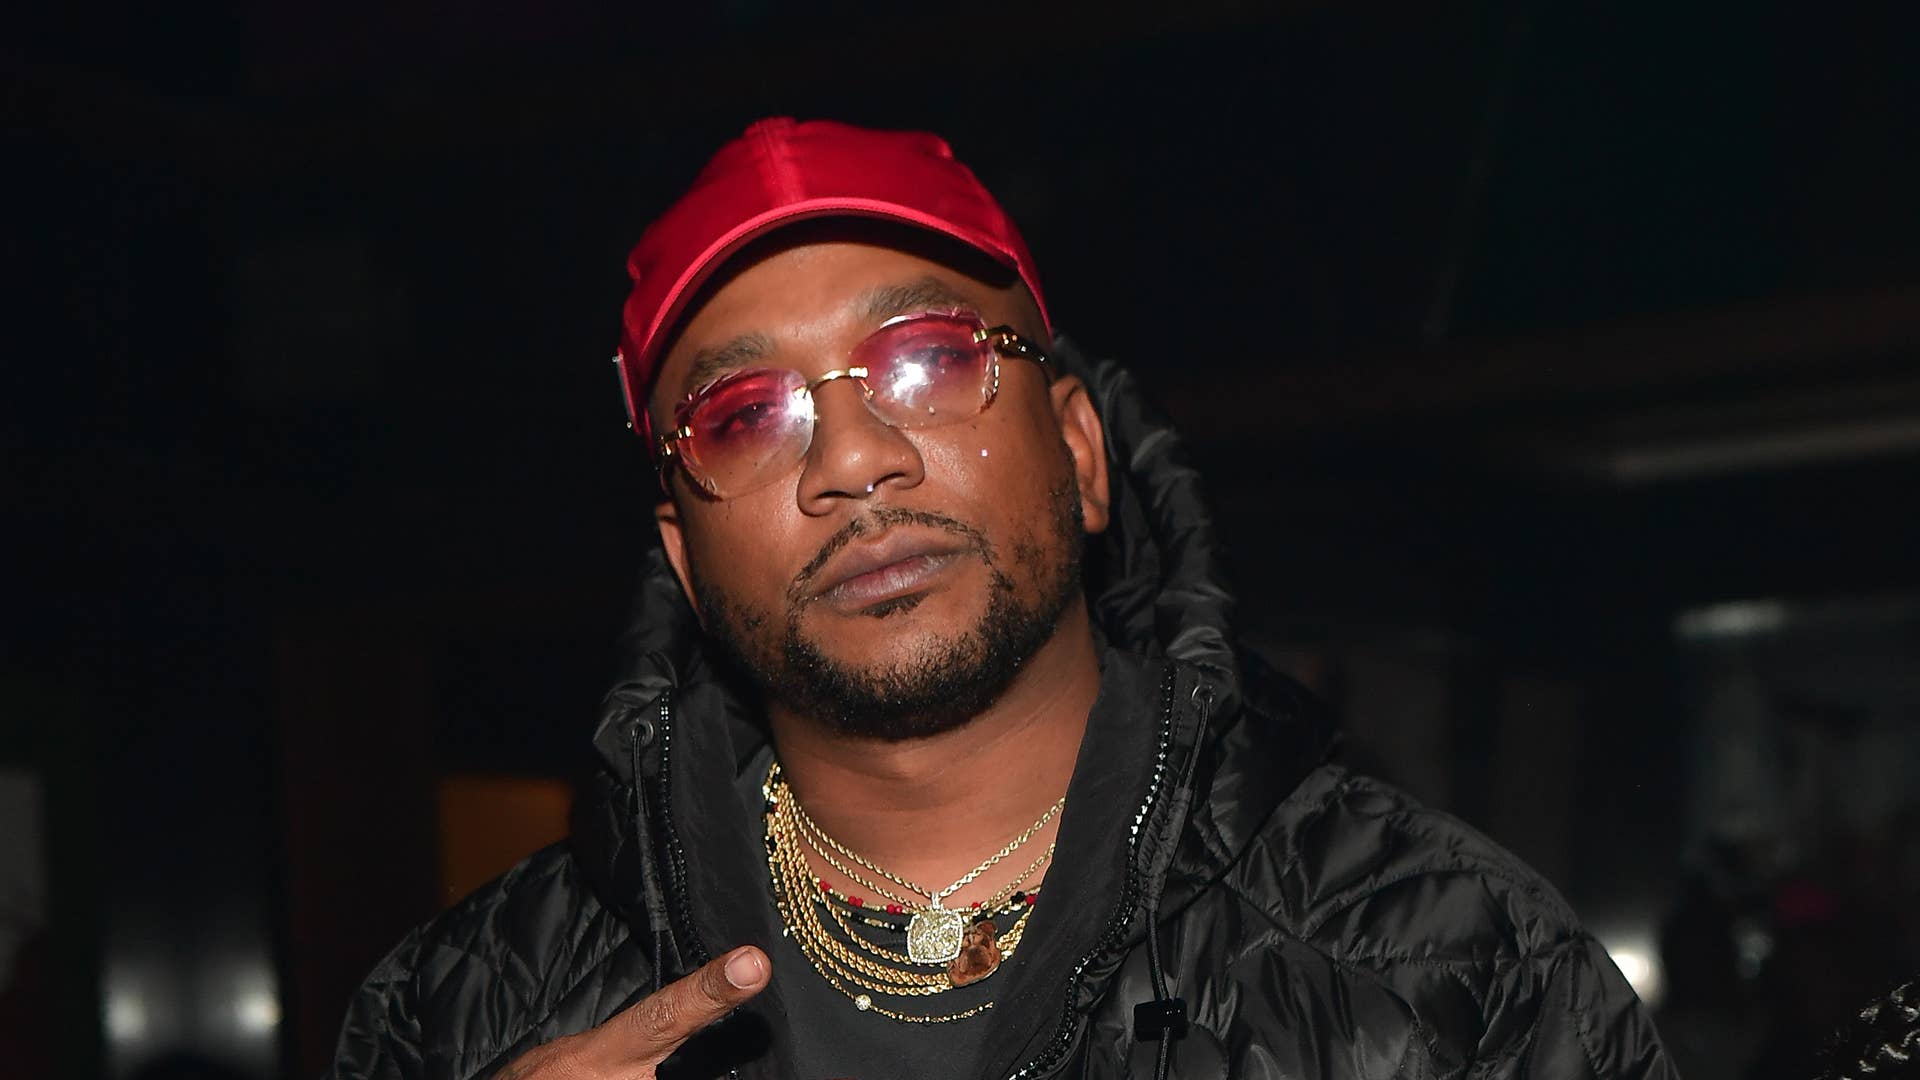 Cyhi The Prynce at Meezy Birthday Event at Gold Room in Atlanta, Georgia on November 24, 2019